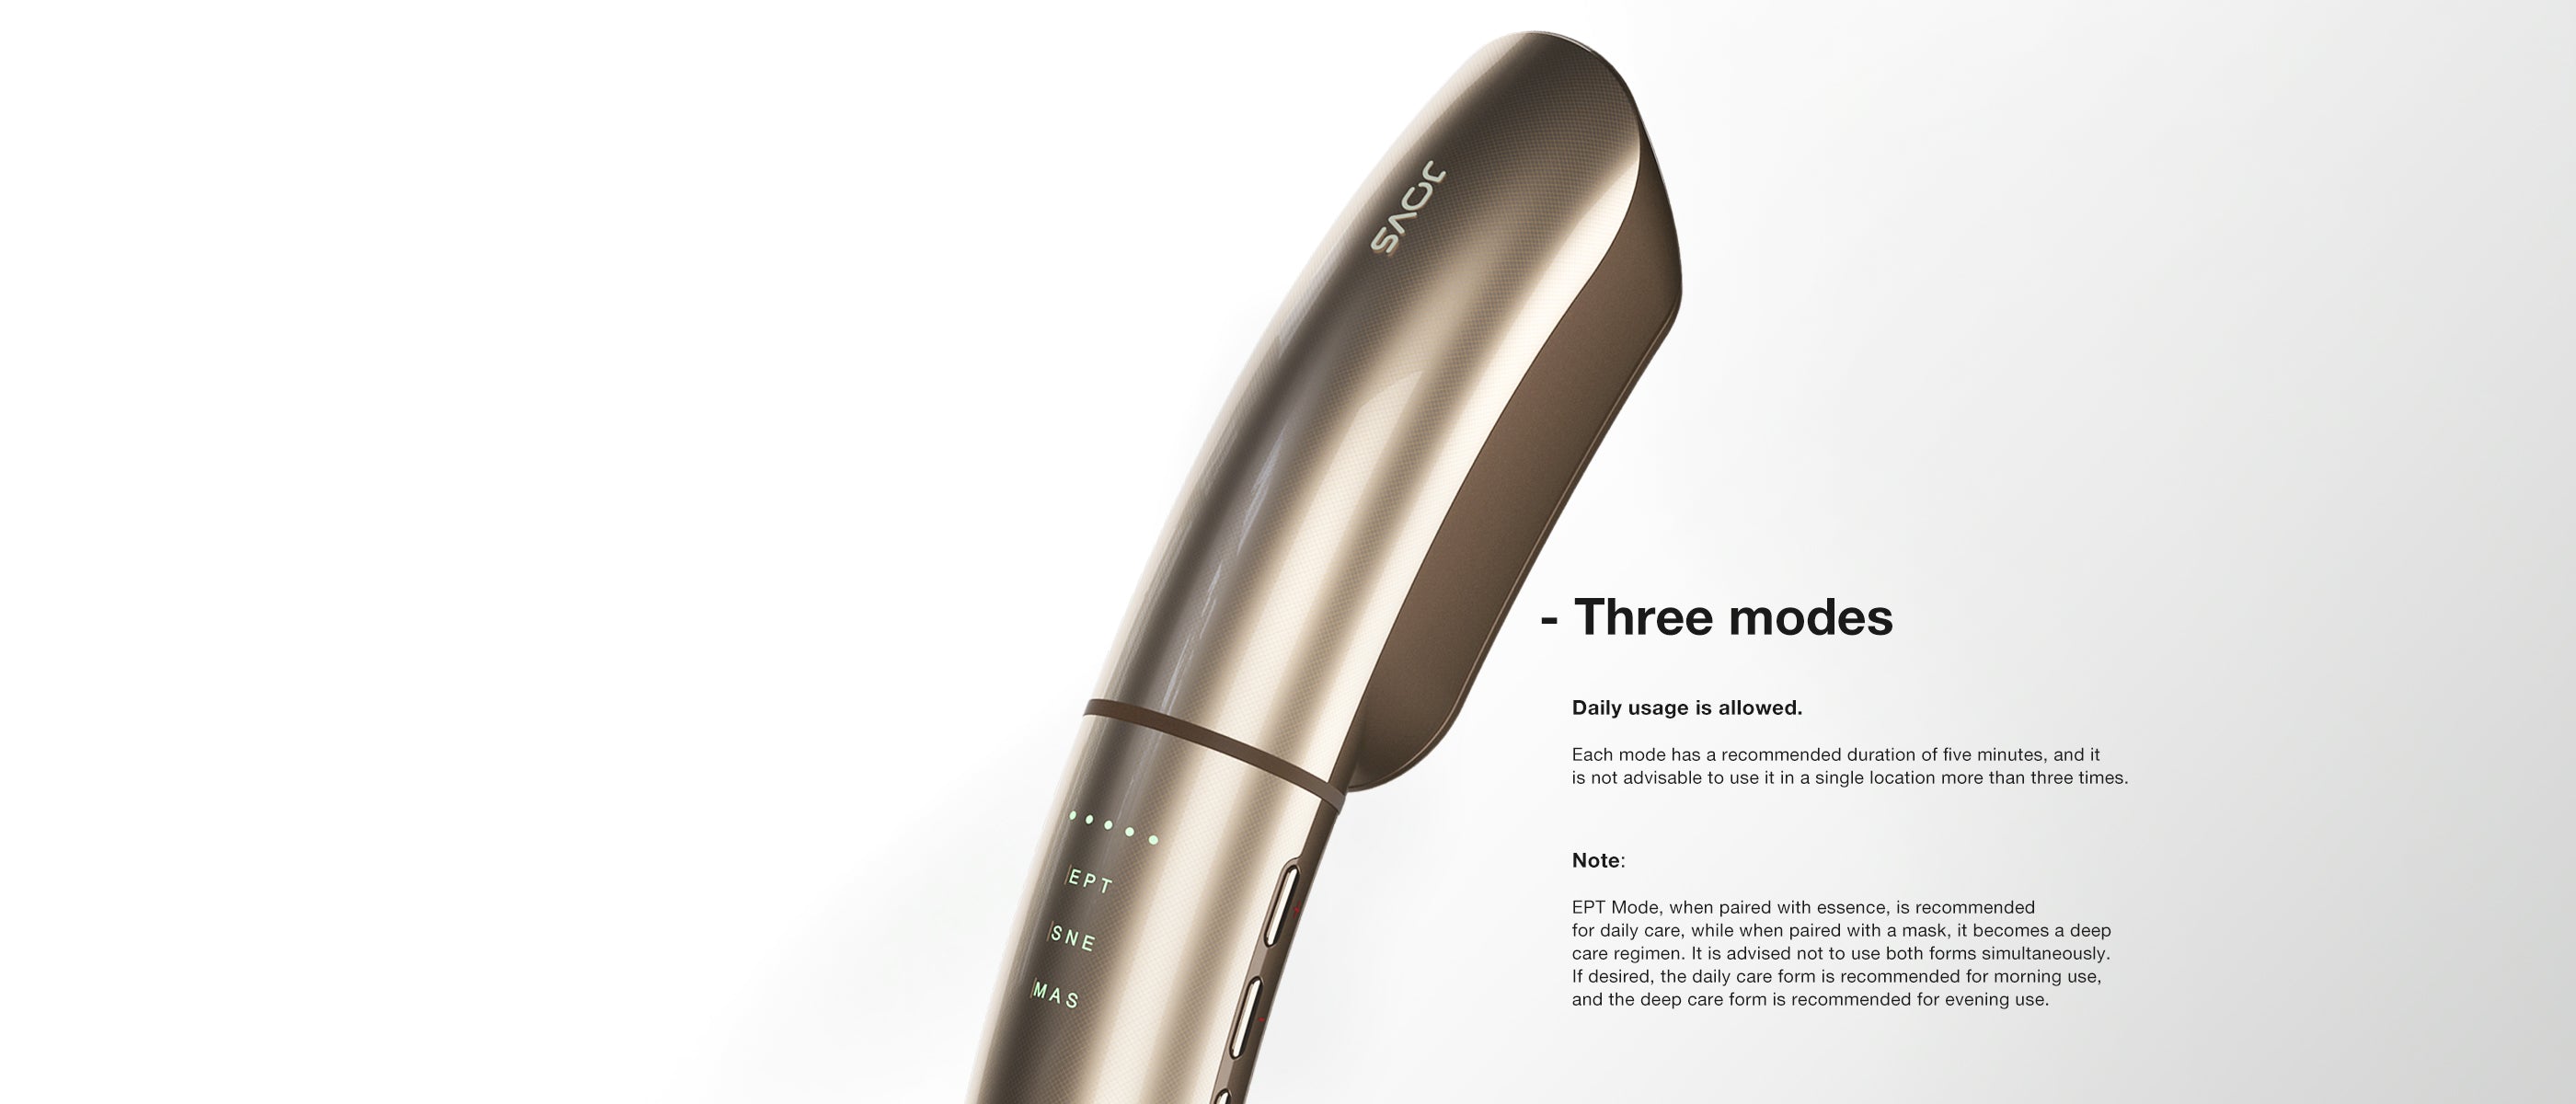 JOVS Slimax Anti-Aging Device showcasing three operational modes for daily skin care and rejuvenation.